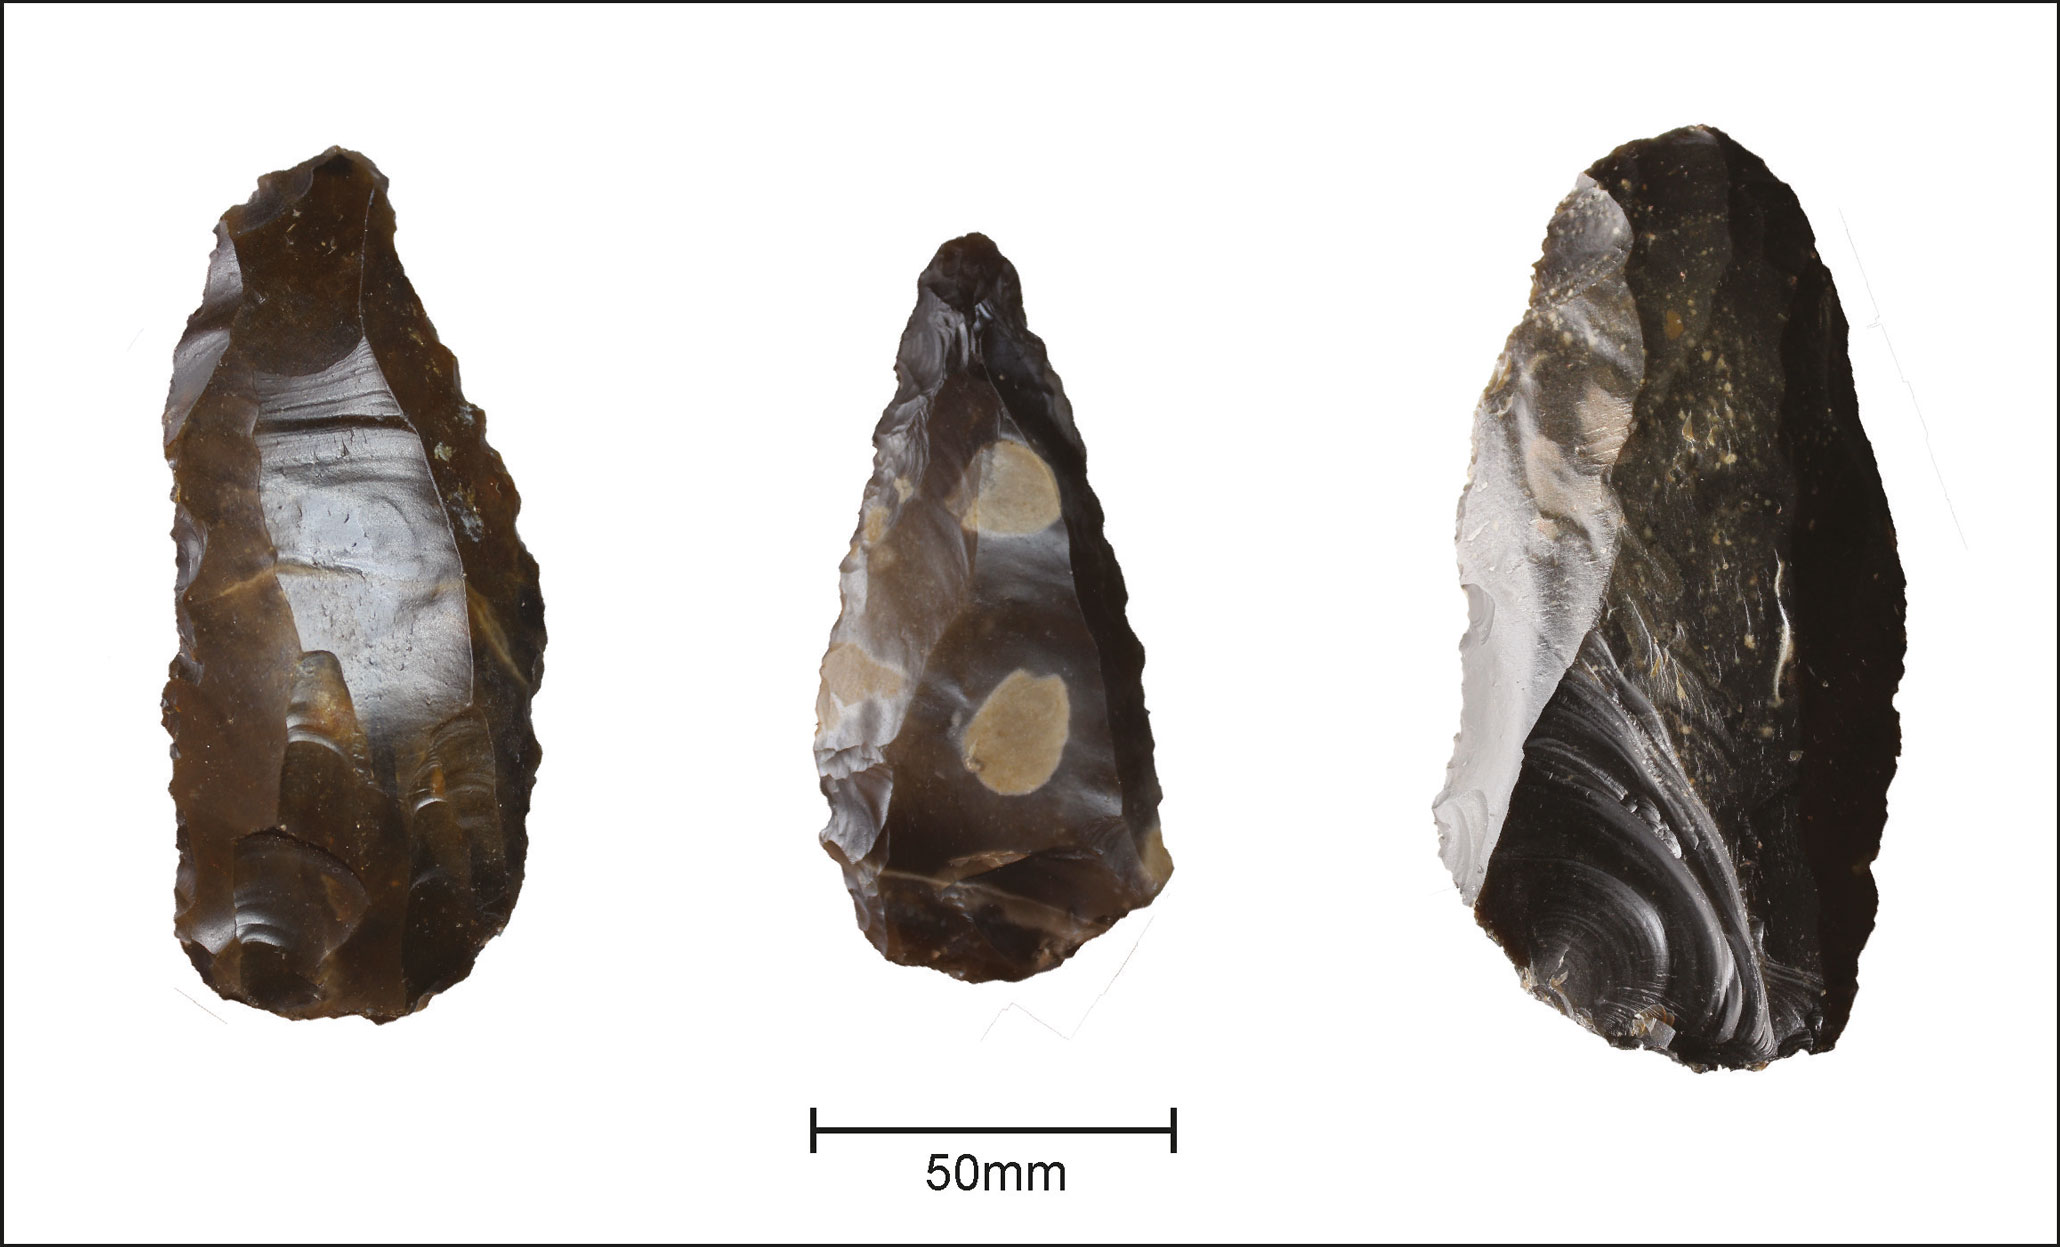 A photograph showing three views of stone tools.